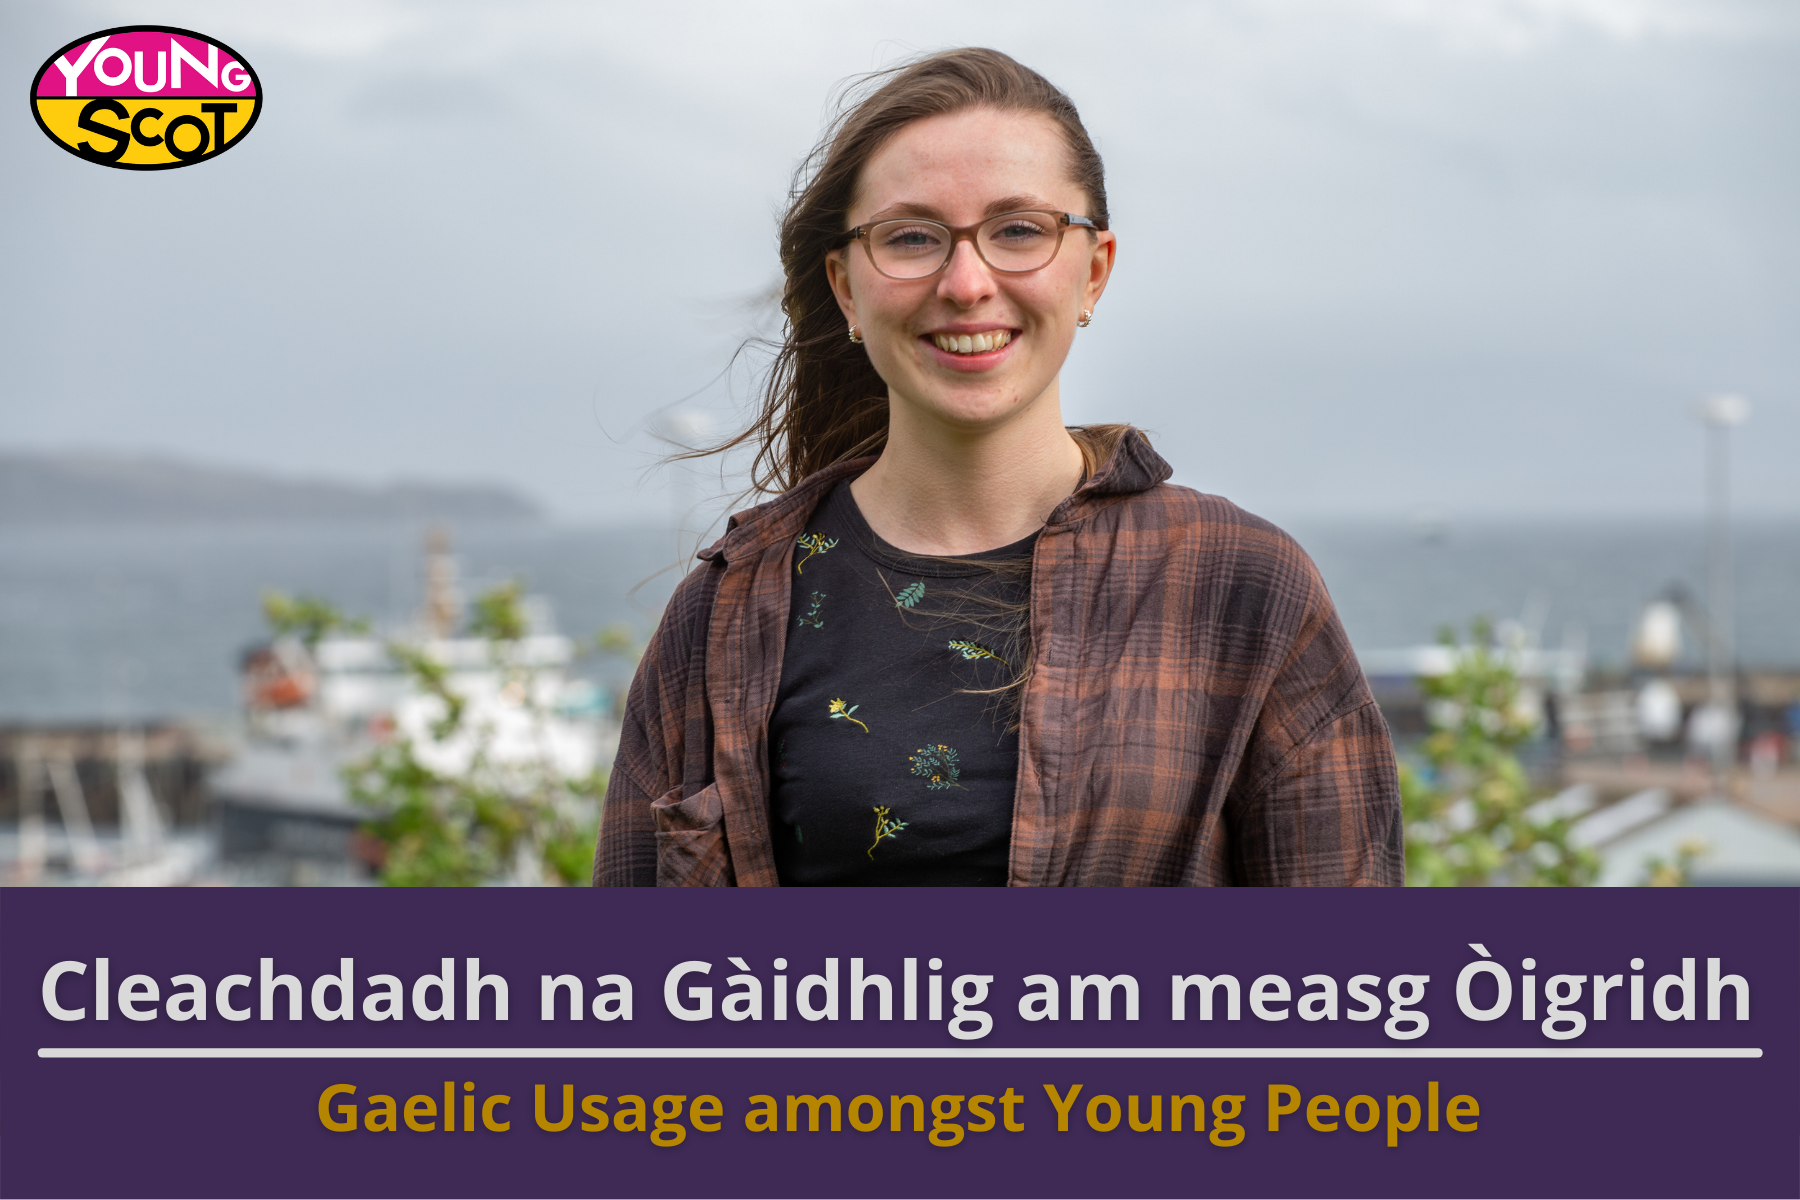 New Survey Looking at Young People’s Engagement with Gaelic Online